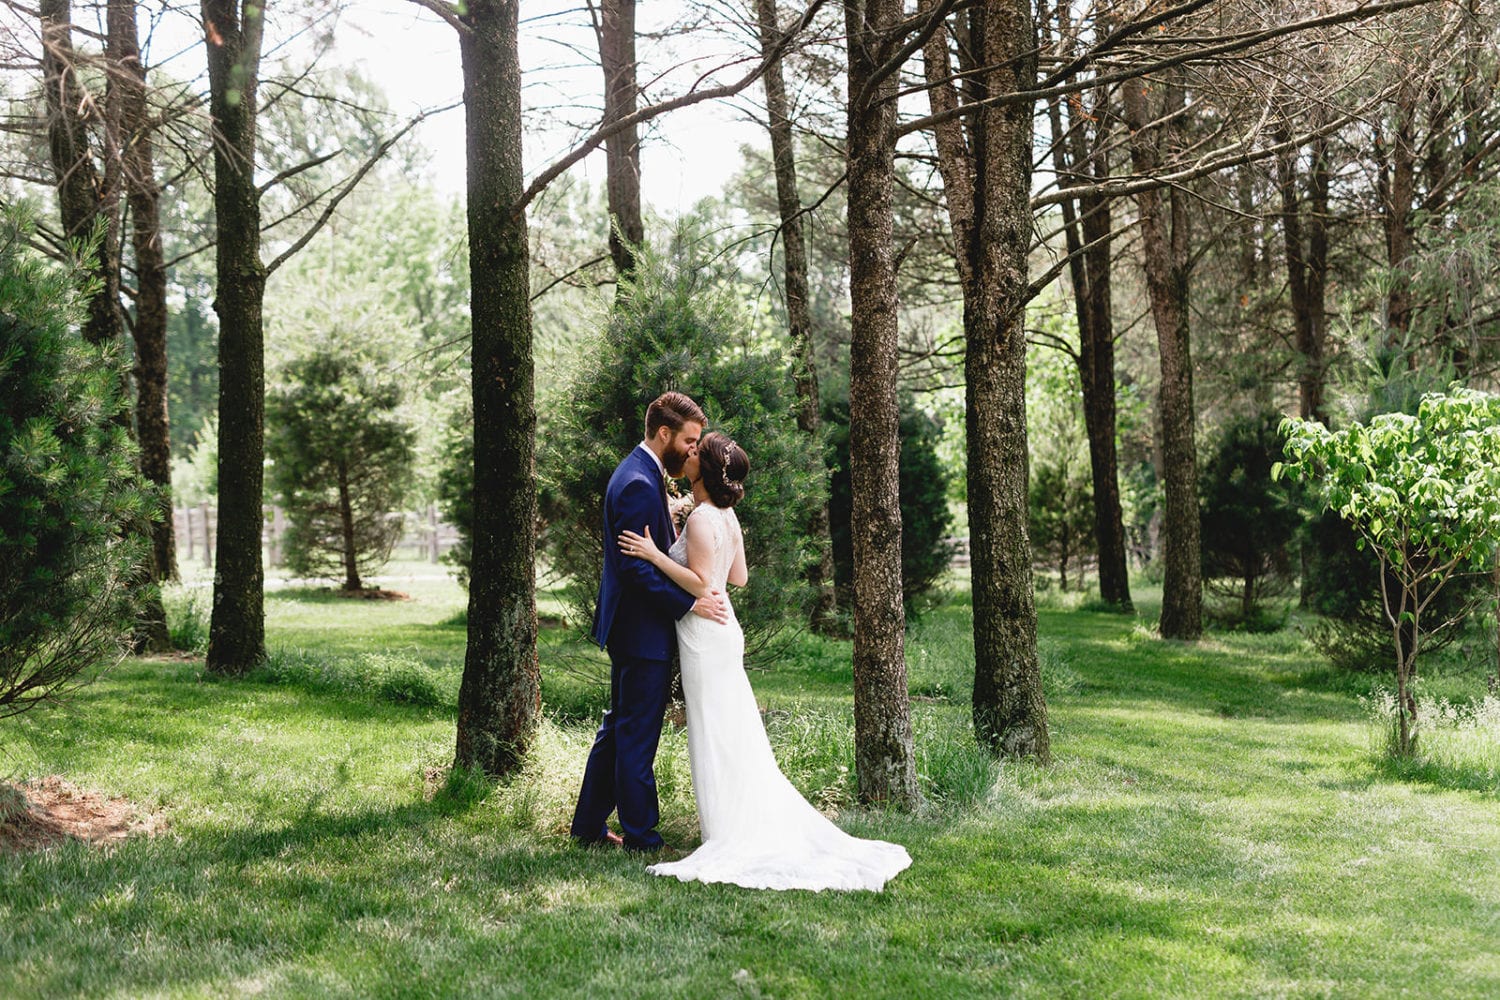 Lovely Outdoors Wedding Location in Lancaster County PA